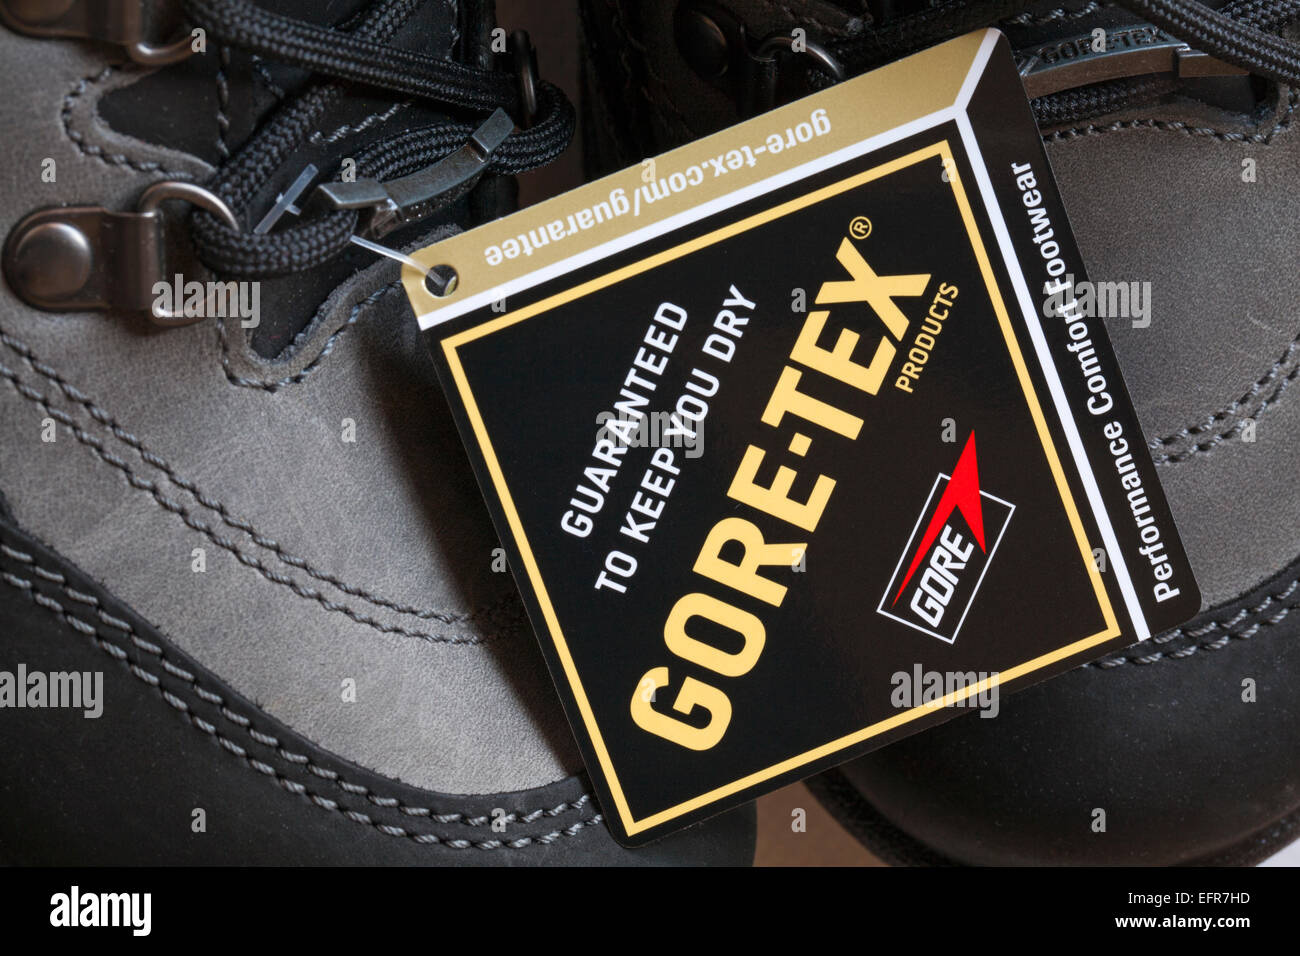 https://c8.alamy.com/comp/EFR7HD/guaranteed-to-keep-you-dry-label-on-hotter-gore-tex-boots-goretex-EFR7HD.jpg